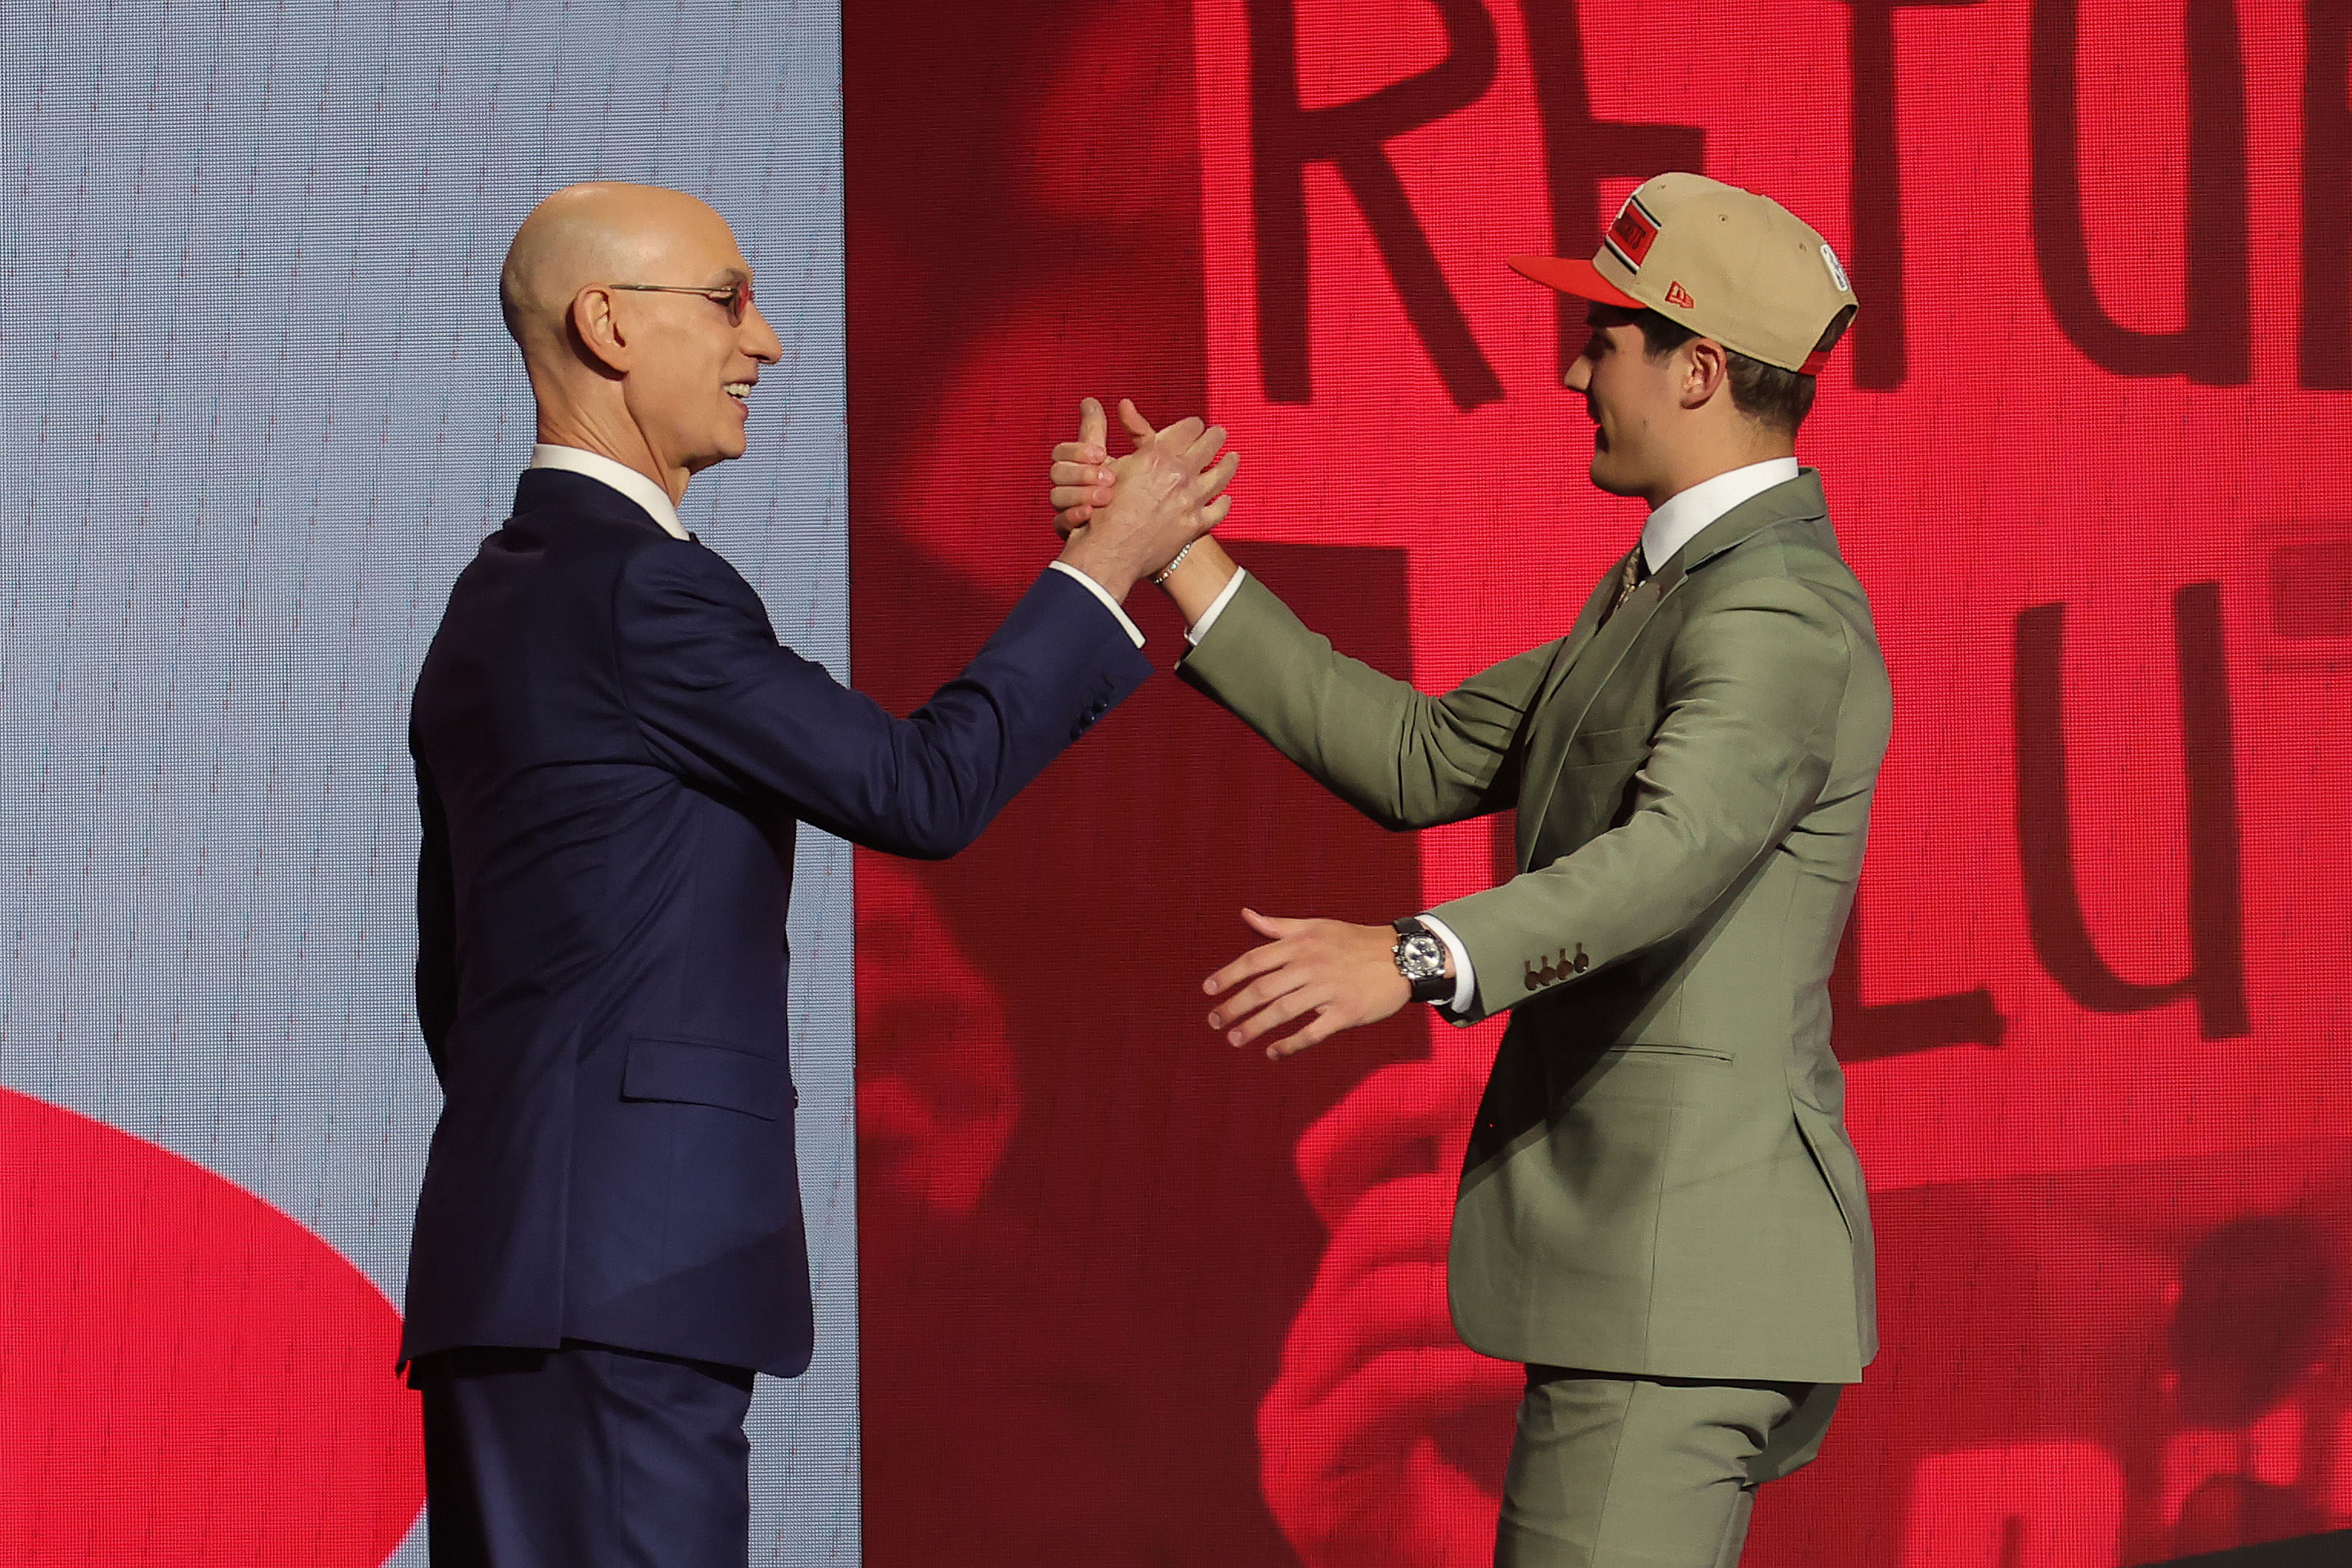 NBA Commissioner Adam Silver greeted Reed Sheppard on stage after the Kentucky guard was selected by the Houston Rockets as the No. 3 overall pick in the 2024 NBA draft.